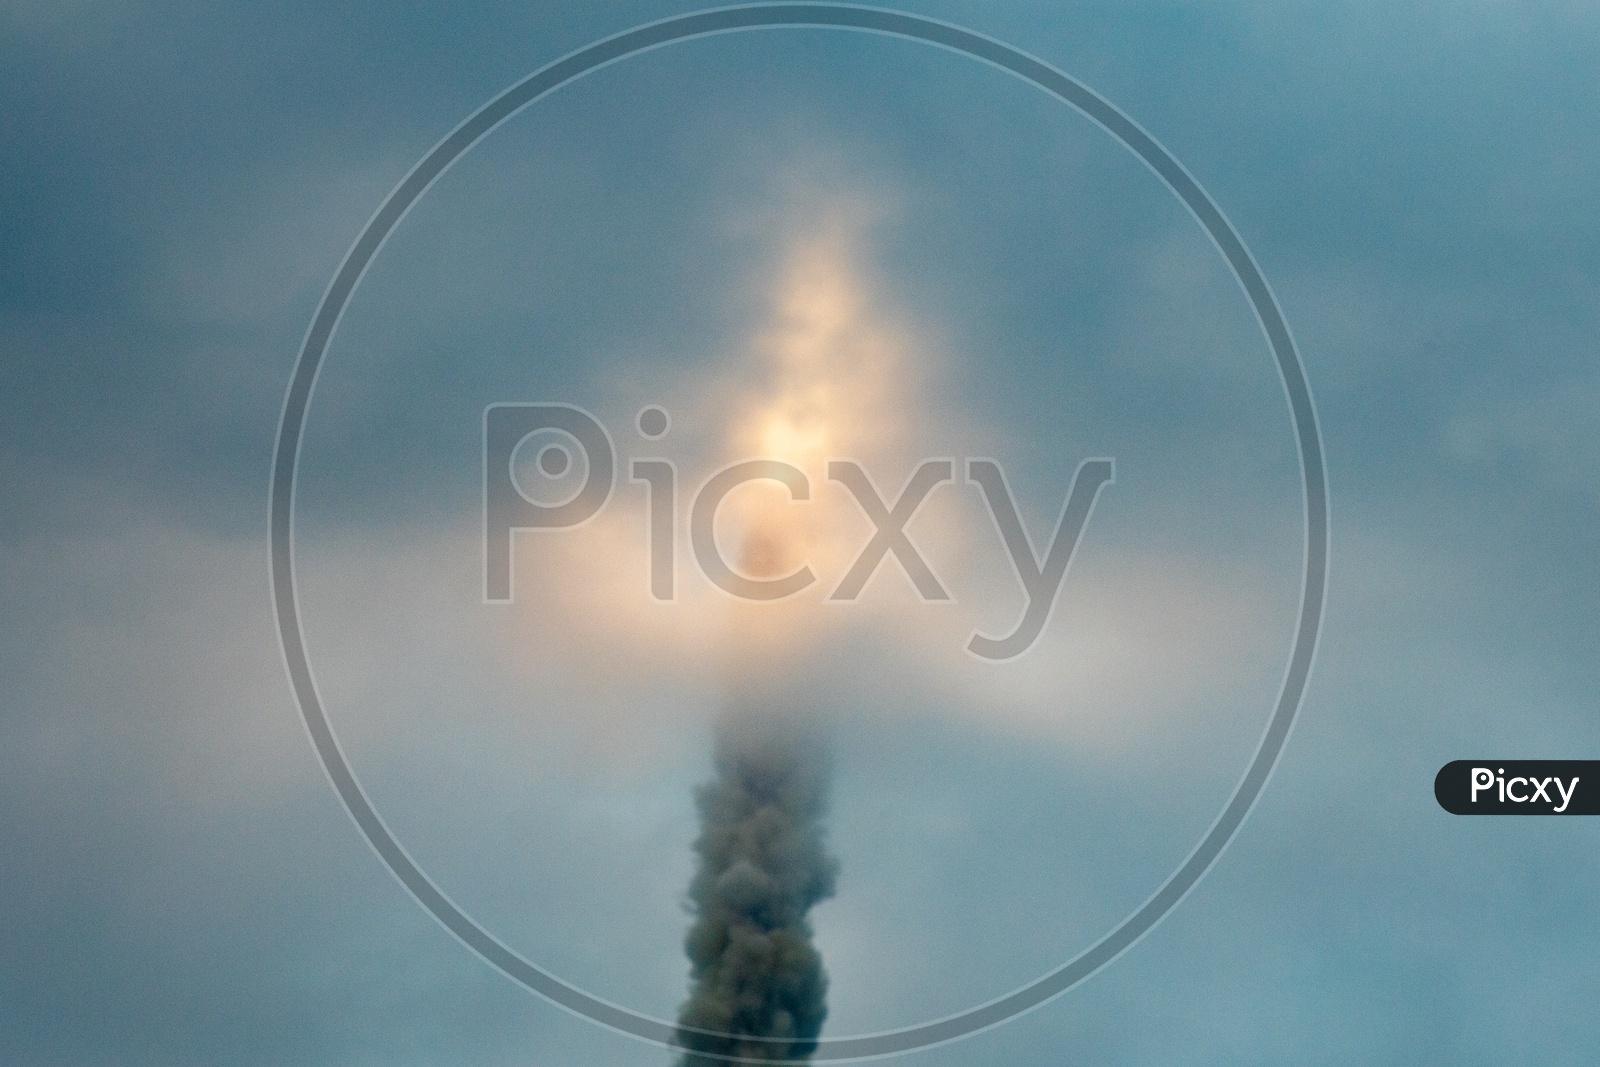 Thick Smoke Cloud Formed By The Rocket Exhaust Of GSLV Mk III M1  Chandrayaan 2  at SHAR